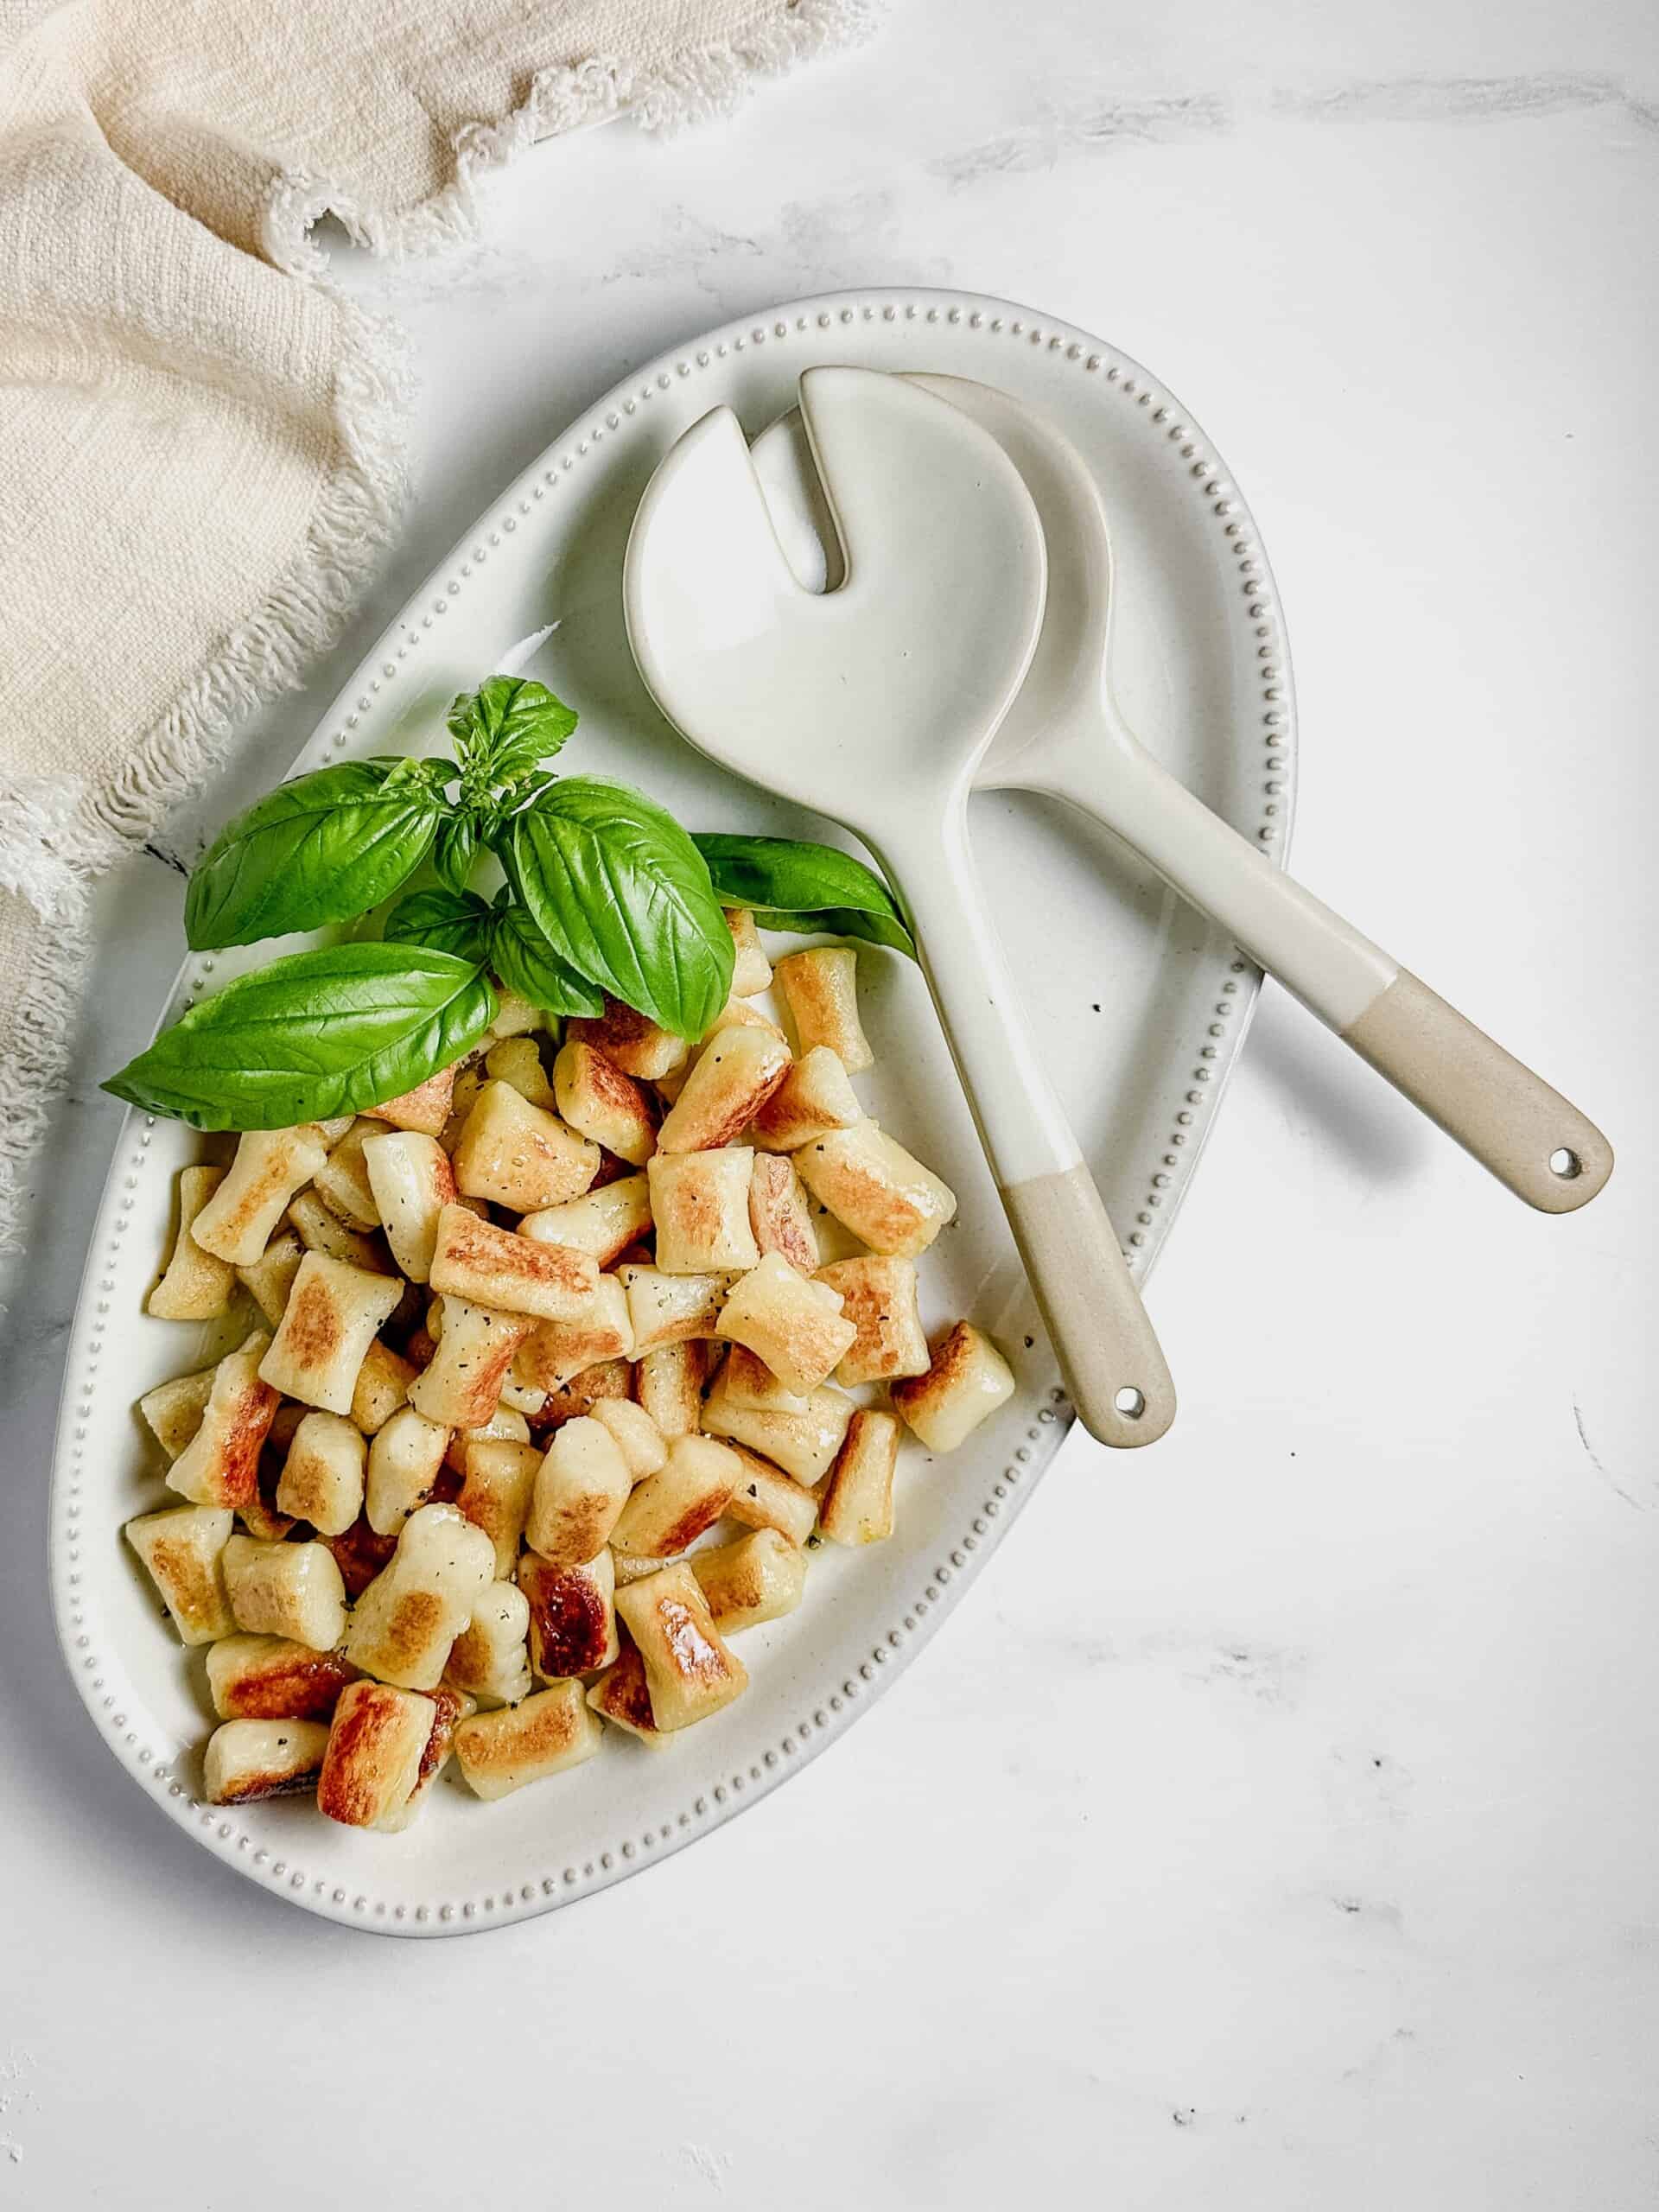 Gnocchi with serving spoon.